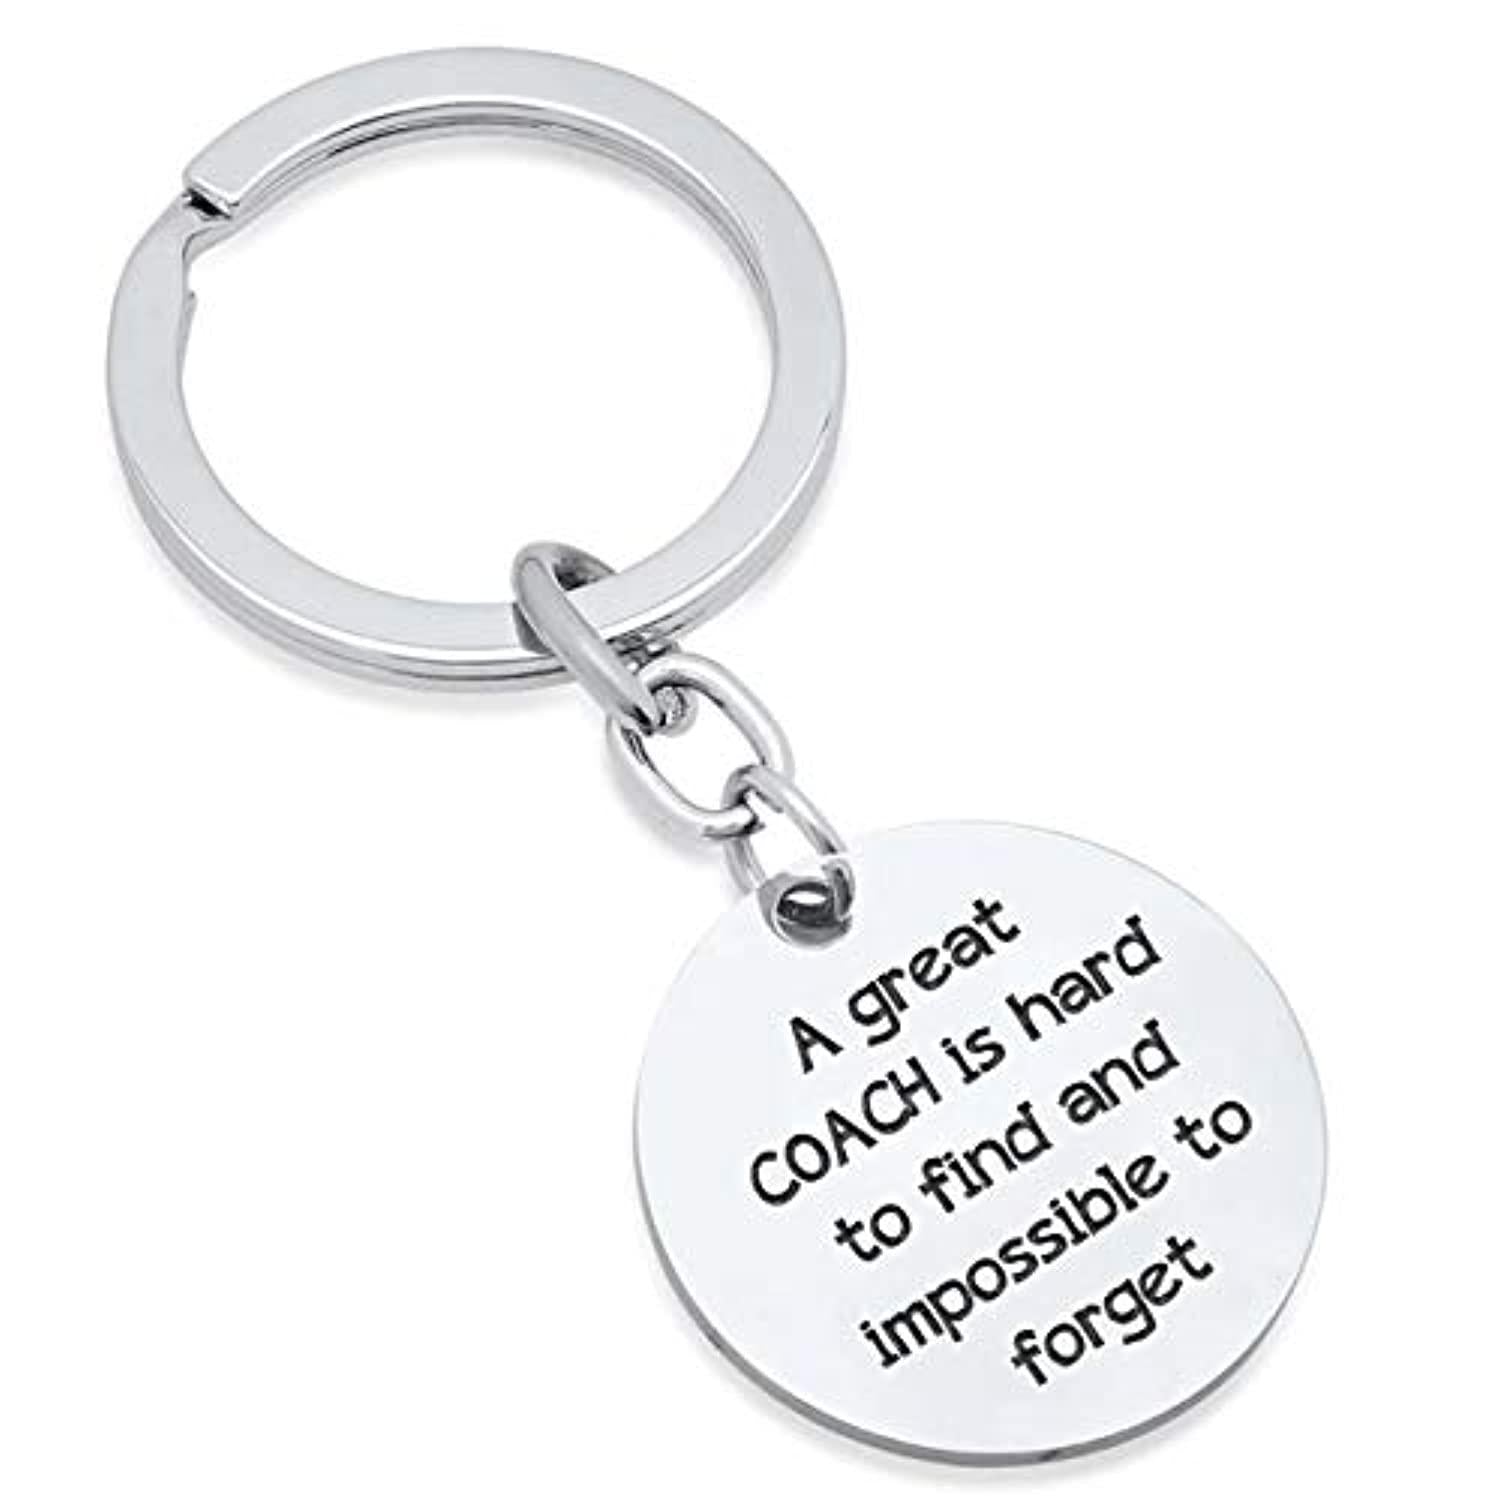  Personalized Coach Keychain Christmas Gifts for Coach A Great  Coach is Hard to Find Thank You Appreciation Key Ring Charm Tag Pendant  Gift for Great Coach Retirement : Clothing, Shoes 